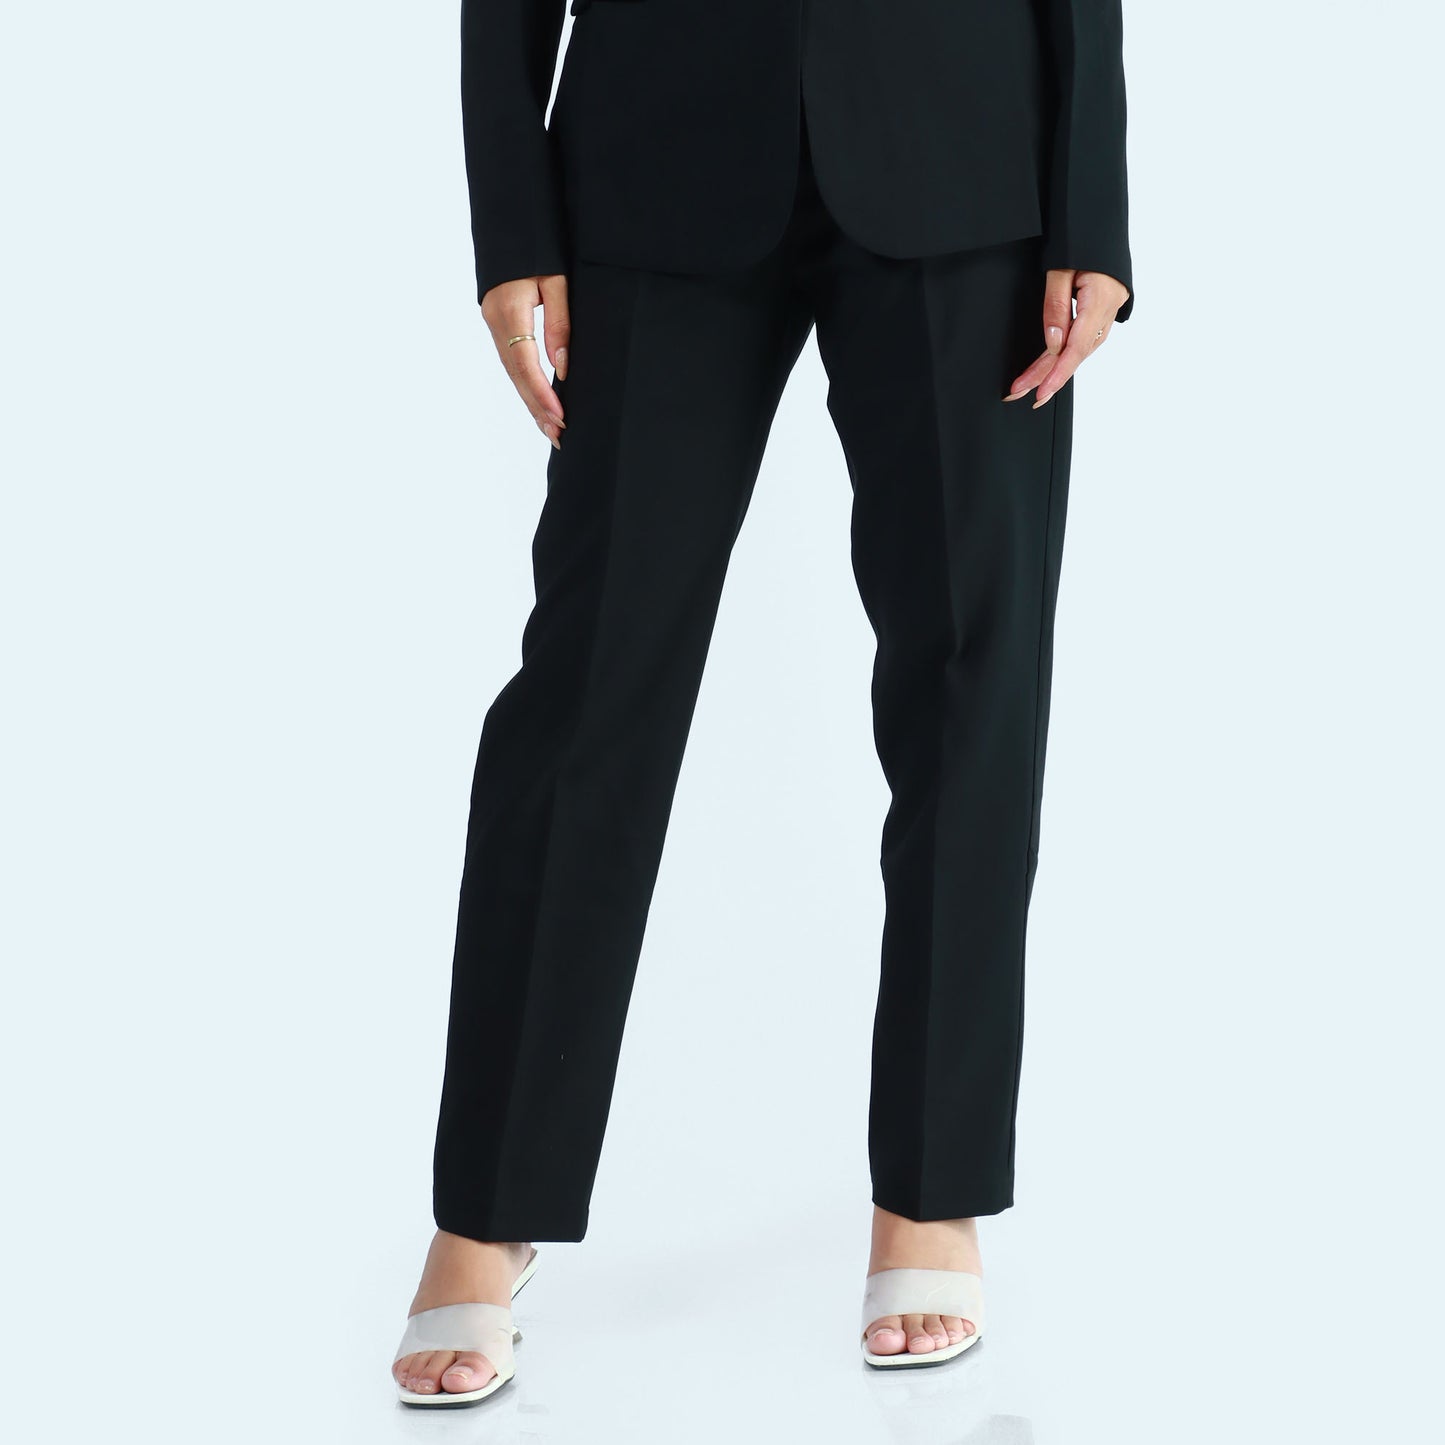 Black Single Button Formal Coat And Pant Set For Women